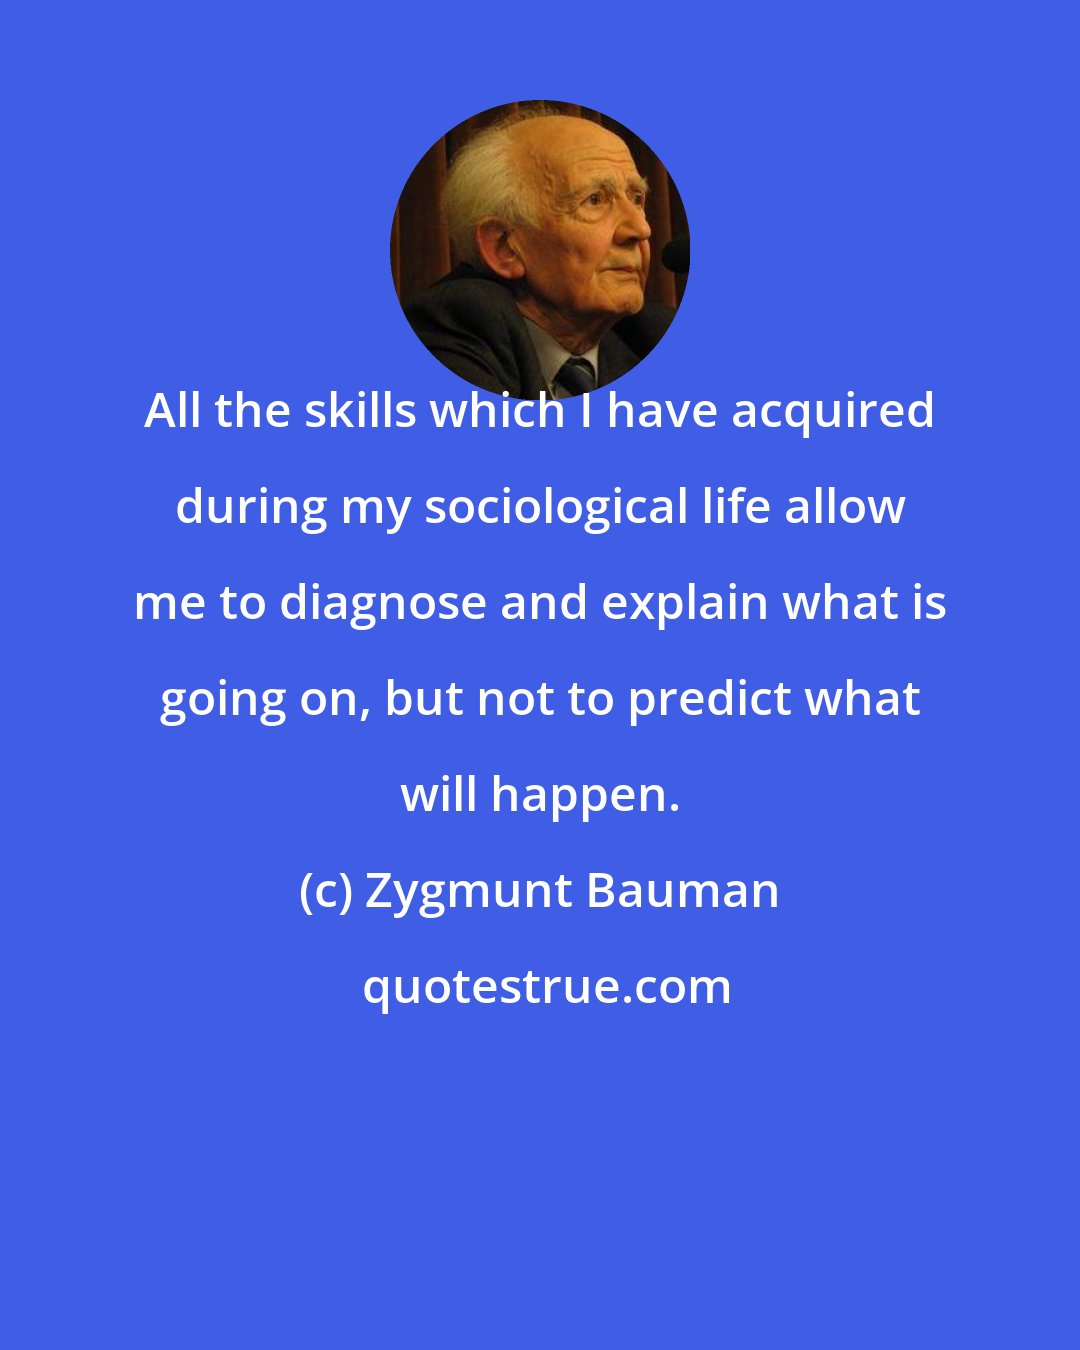 Zygmunt Bauman: All the skills which I have acquired during my sociological life allow me to diagnose and explain what is going on, but not to predict what will happen.